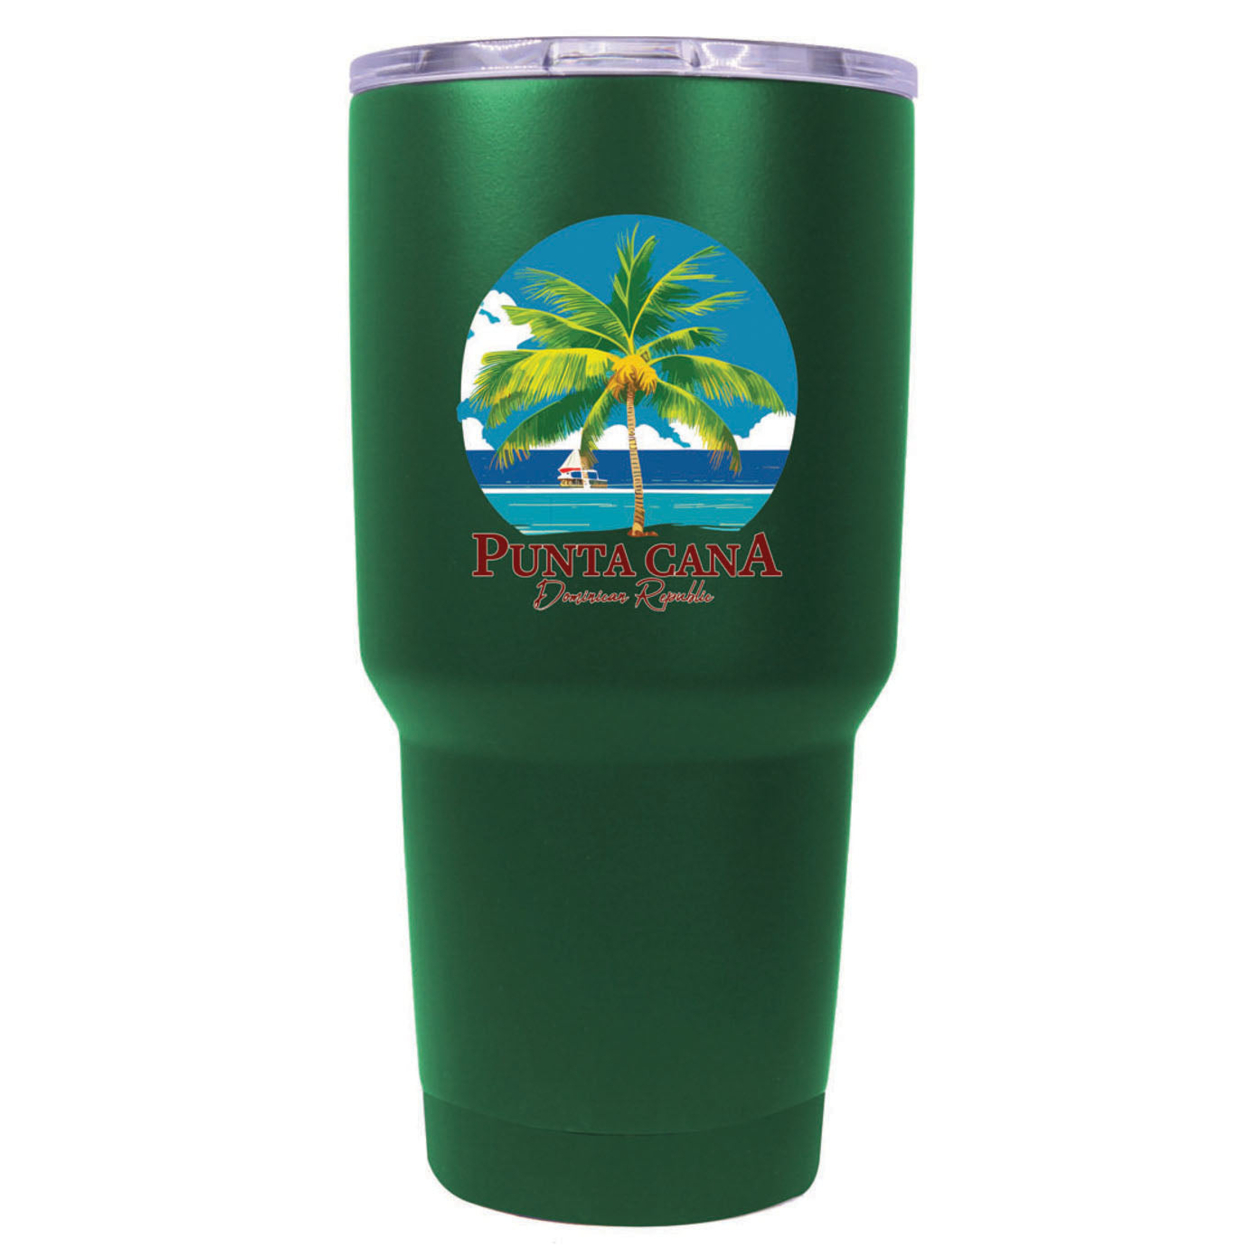 Punta Cana Dominican Republic Souvenir 24 Oz Insulated Stainless Steel Tumbler - Stainless Steel, PARROT B